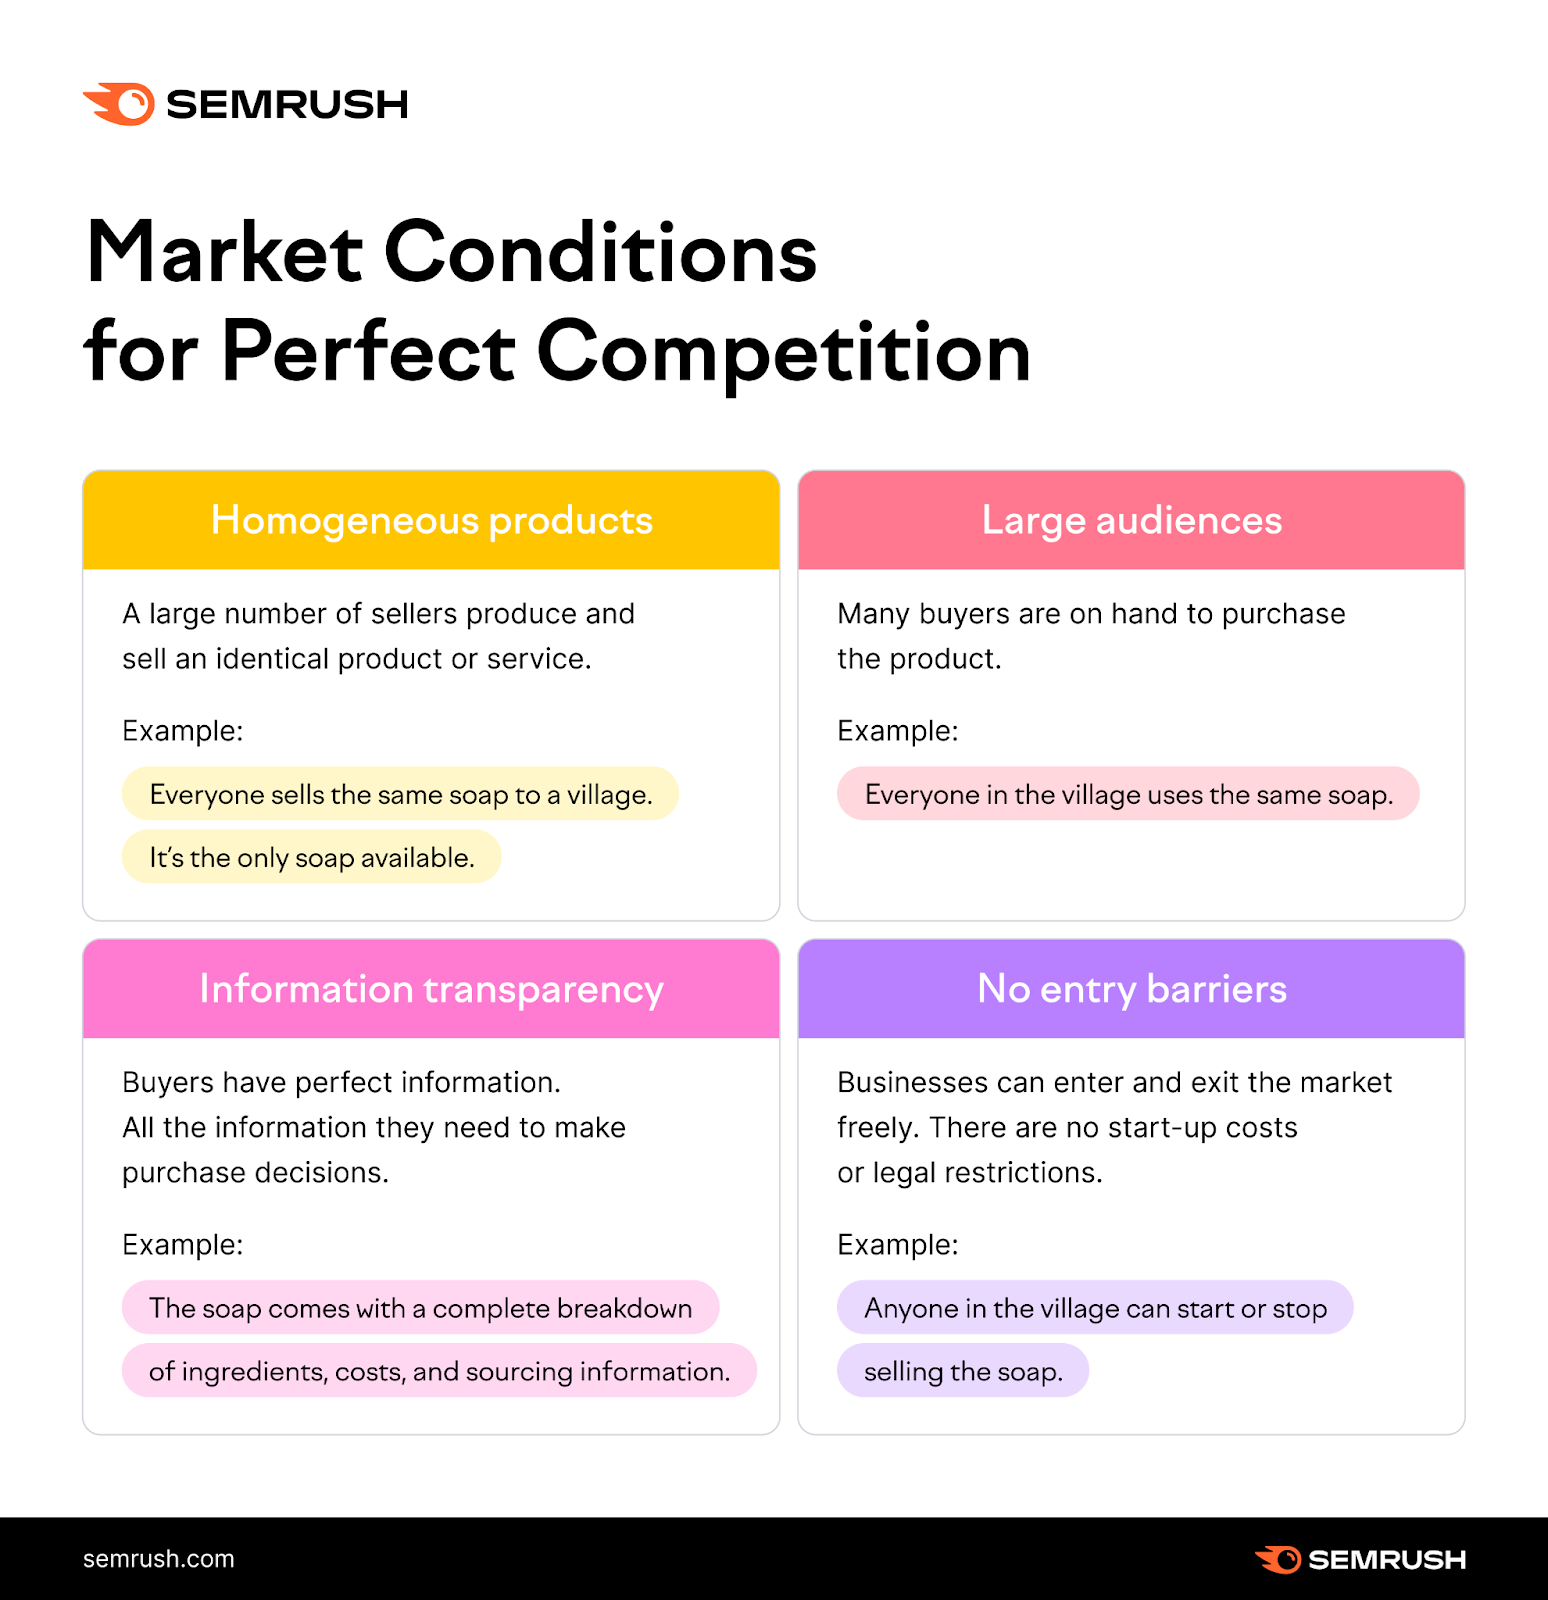 market conditions for perfect competition infographic